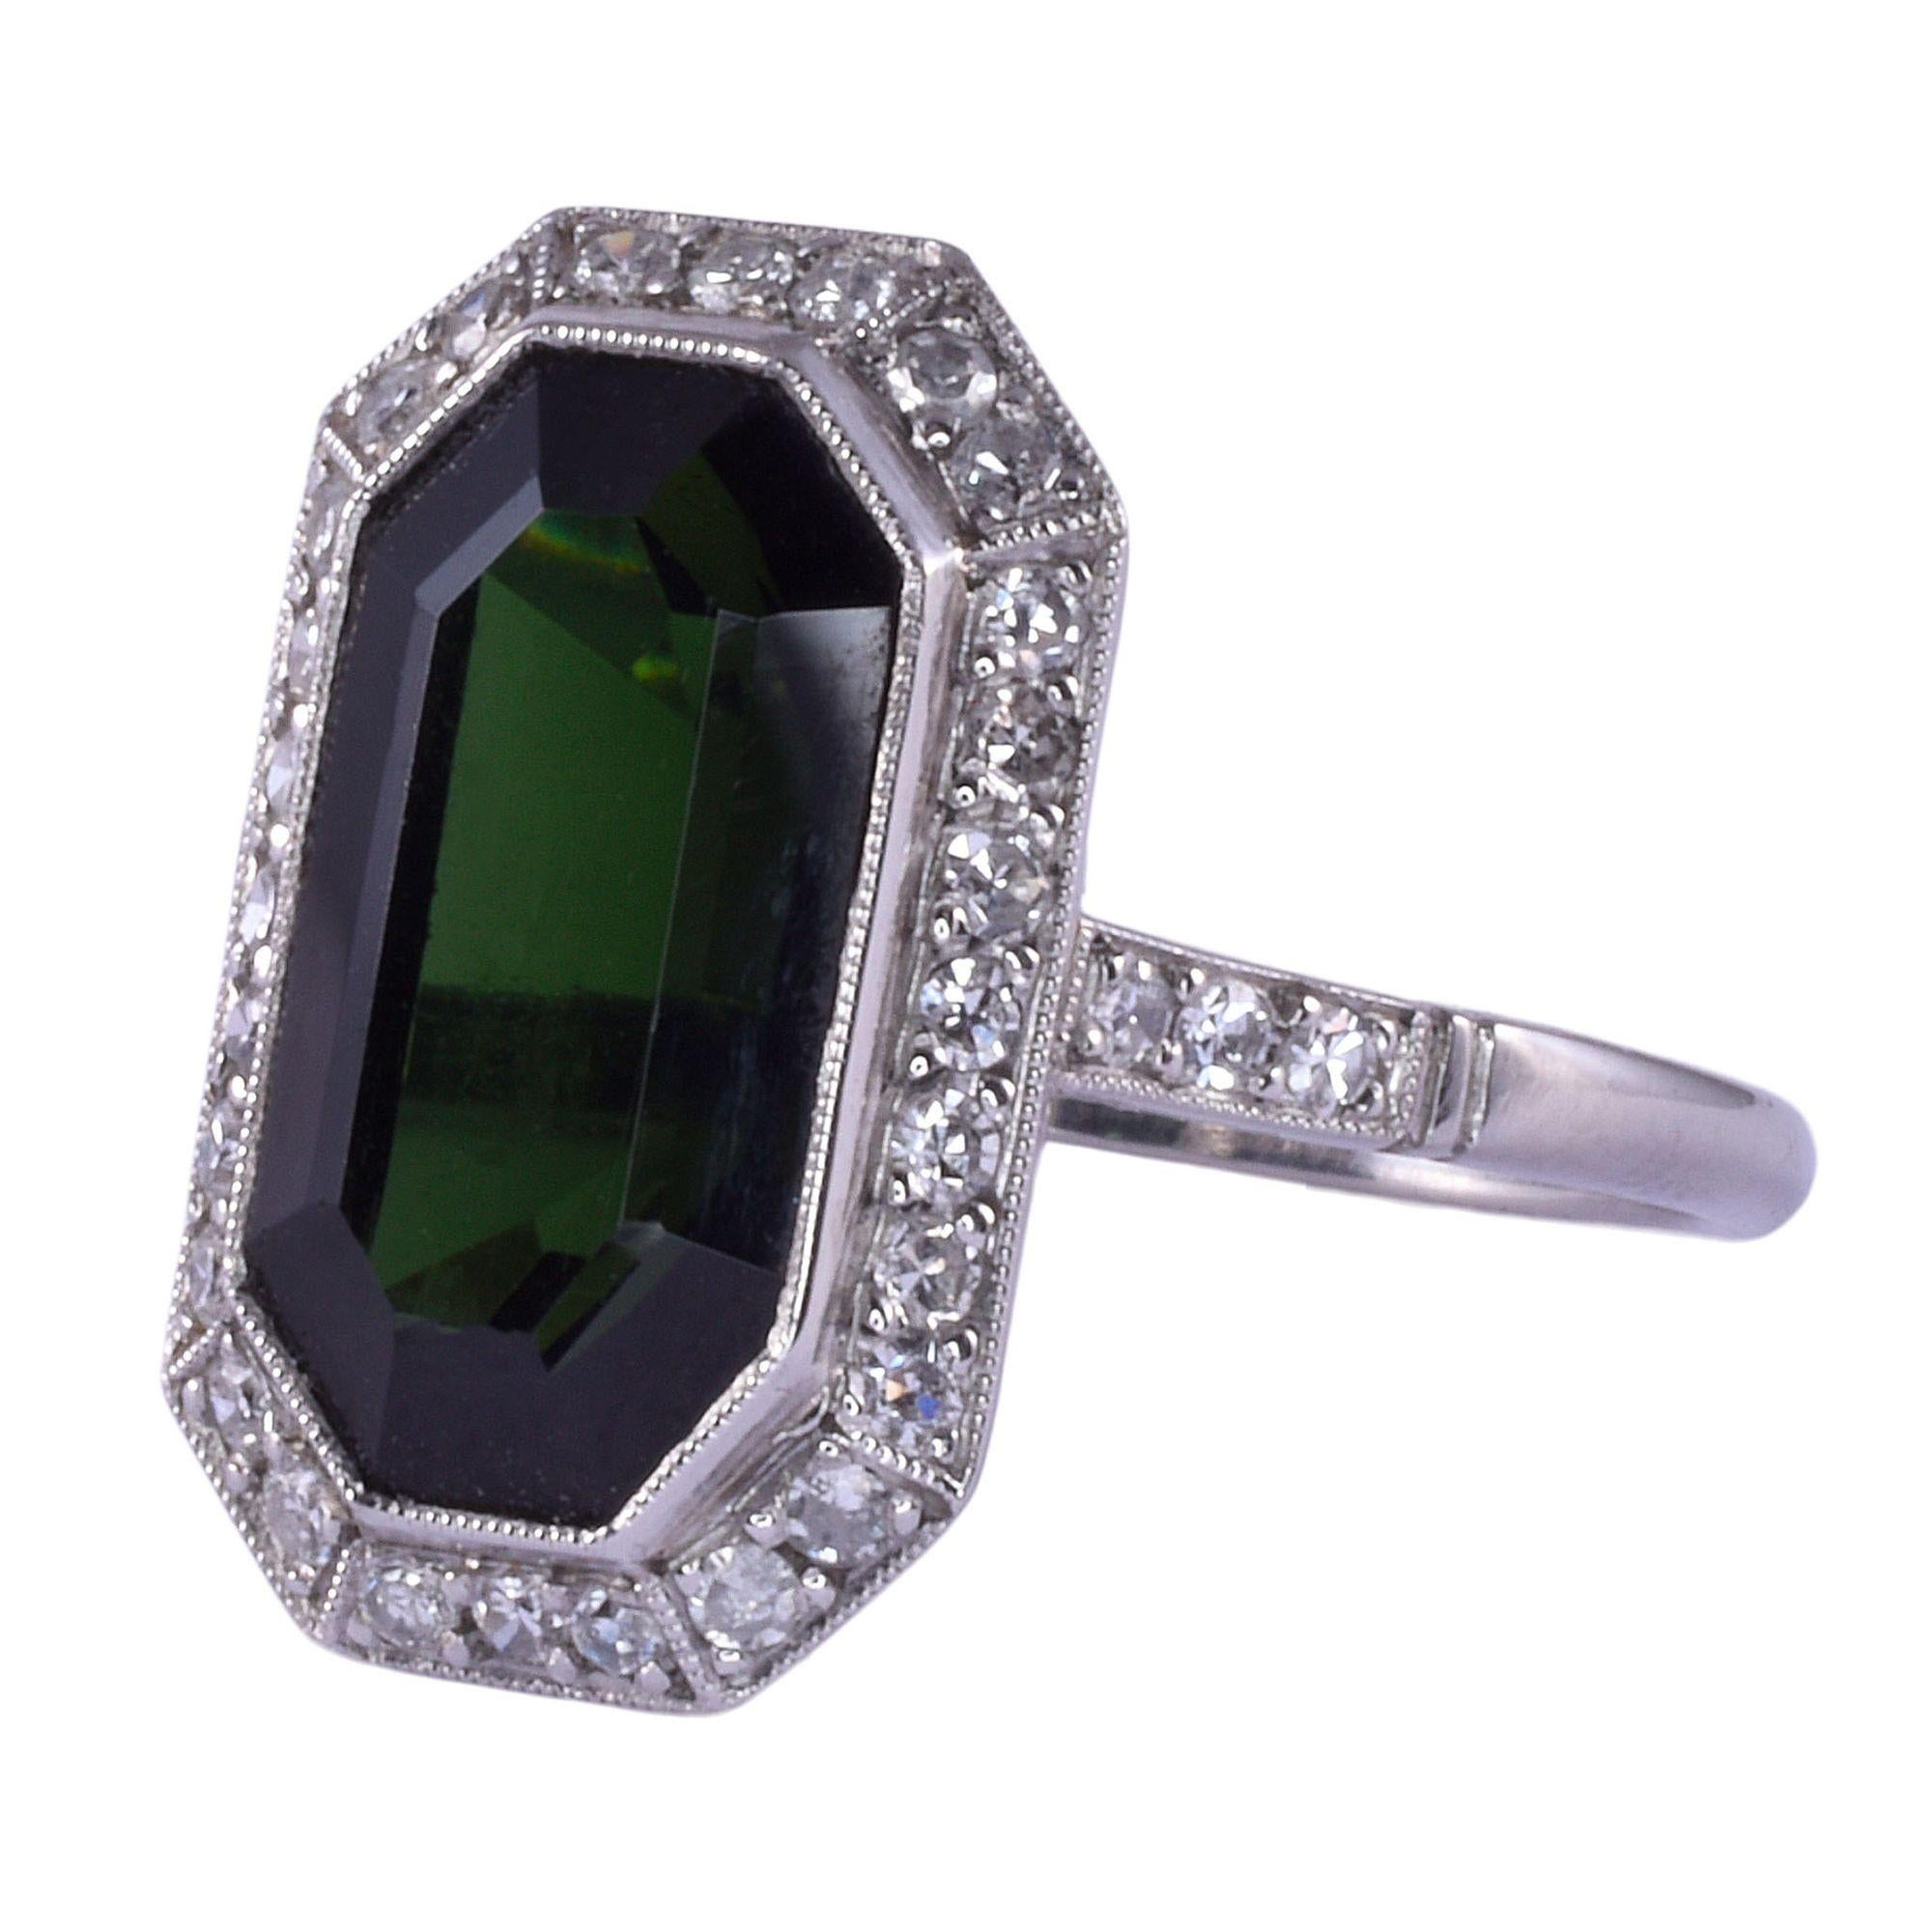 Vintage Art Deco dark green tourmaline platinum ring, circa 1930. This Art Deco ring is crafted in platinum and features a 4.06 carat dark green tourmaline encircled with .50 carat total weight of single cut diamonds. The diamonds have VS1-SI1